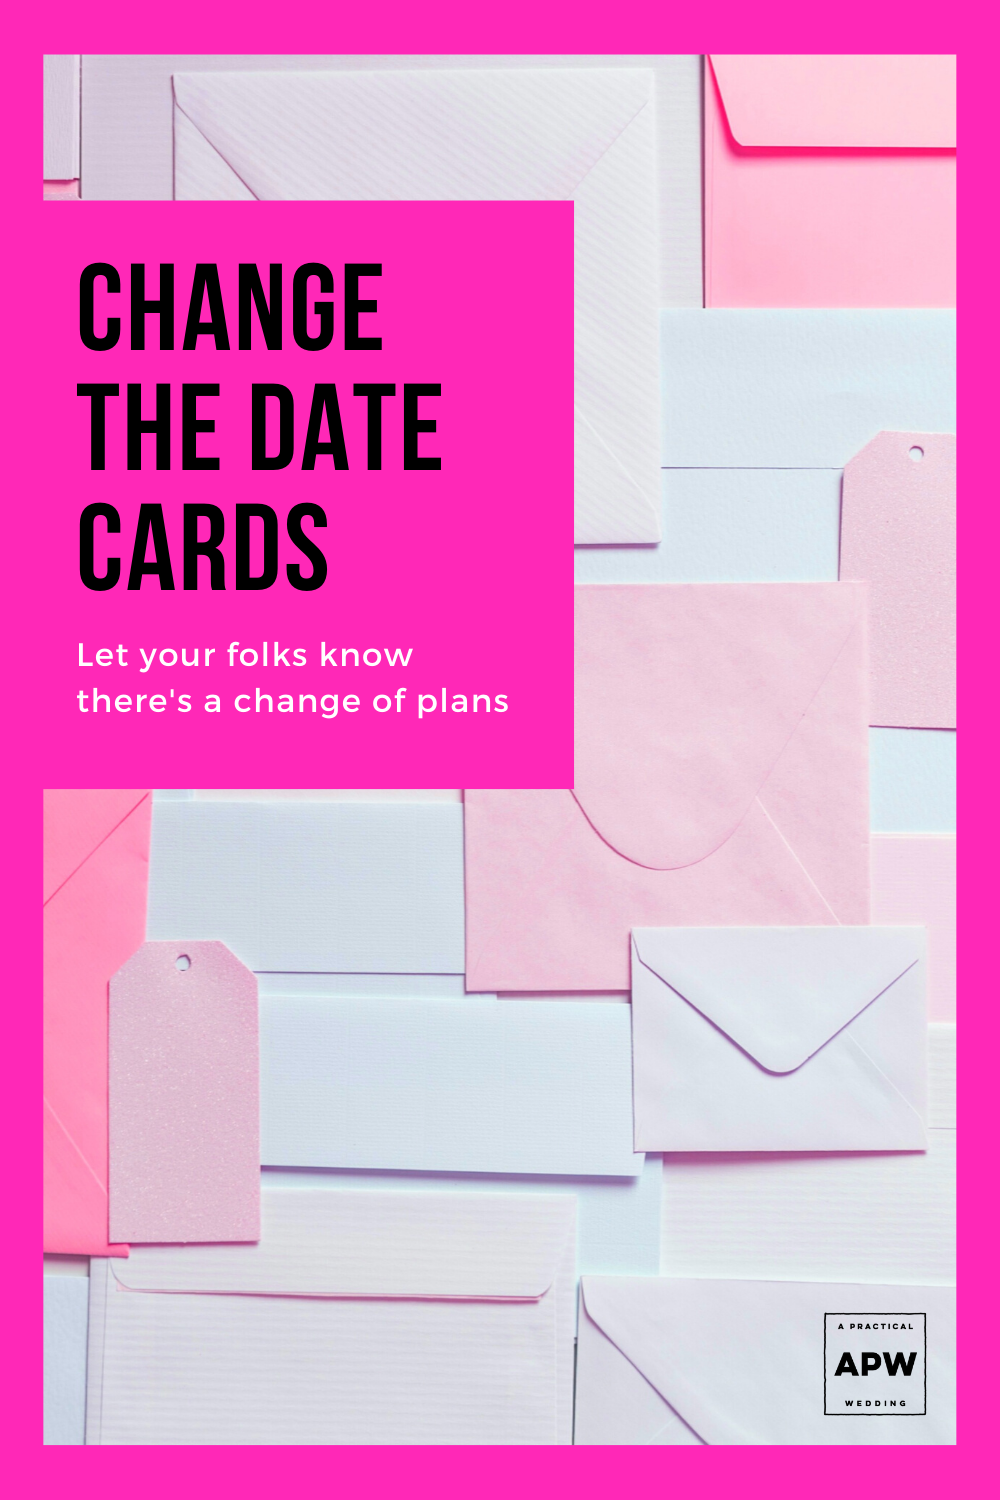 change the date cards text overlaid on envelopes